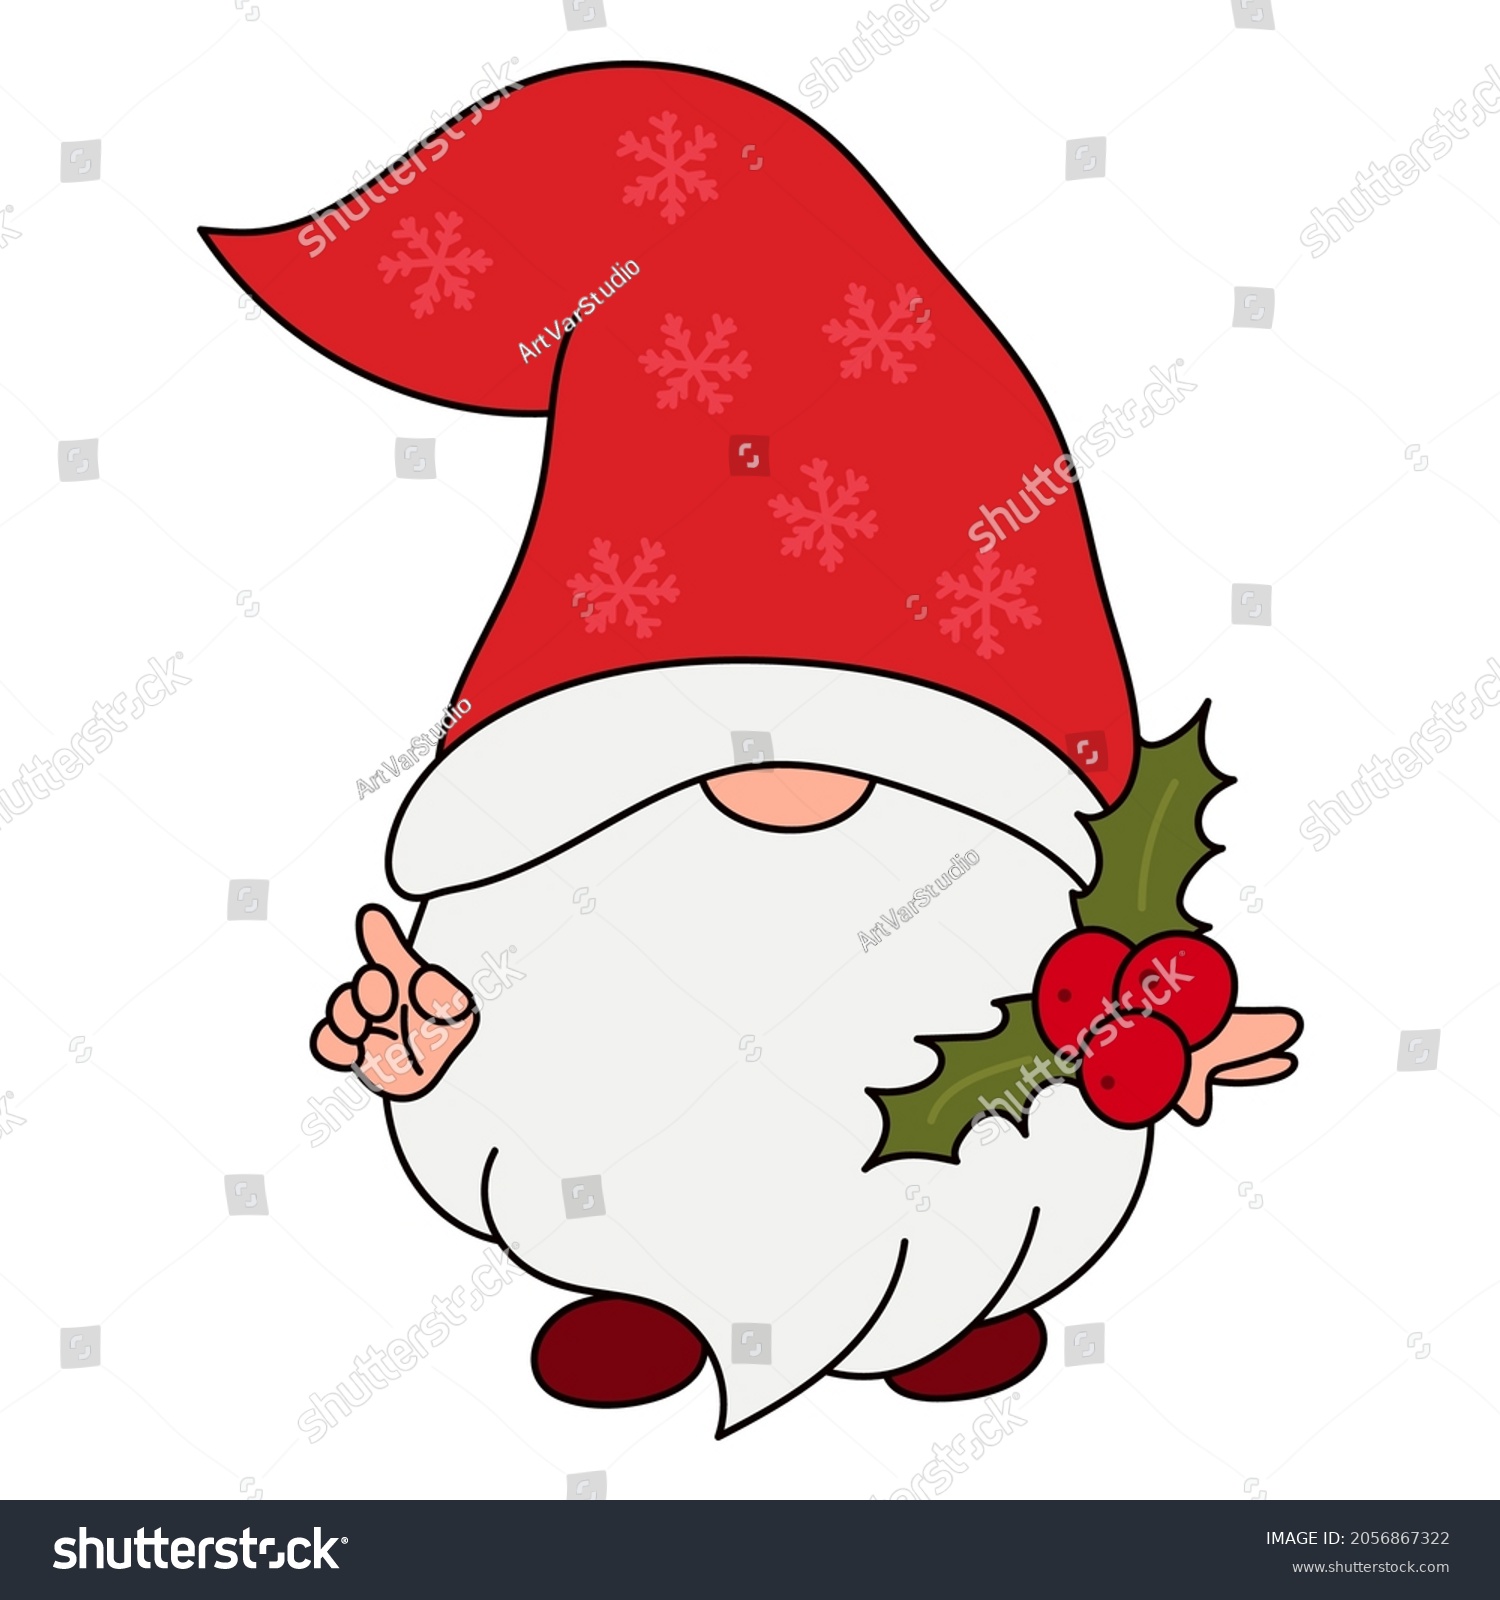 SVG of Christmas character clipart. Xmas gnome vector illustration. Cartoon clipart Christmas gnome set for kids activity t shirt print, icon, logo, label, patch or sticker. svg